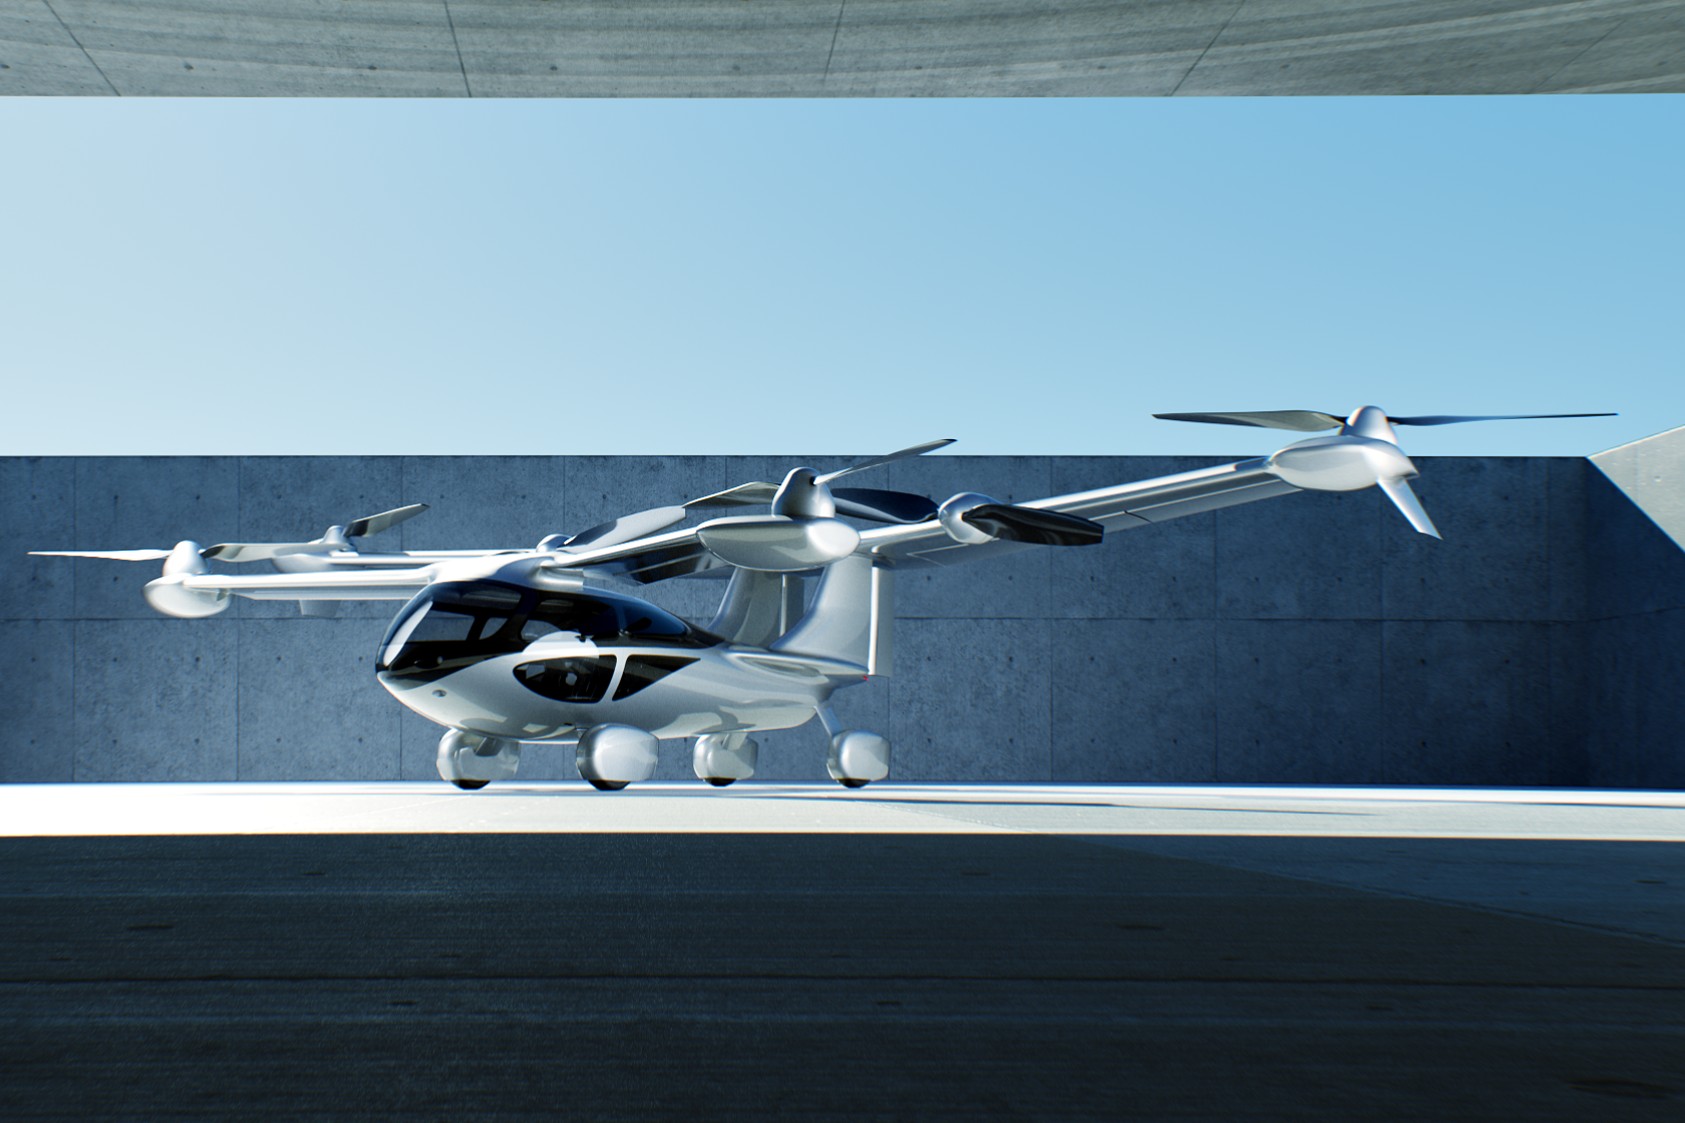 The Aska A5 is a electric vertical takeoff and landing (eVTOL) vehicle).